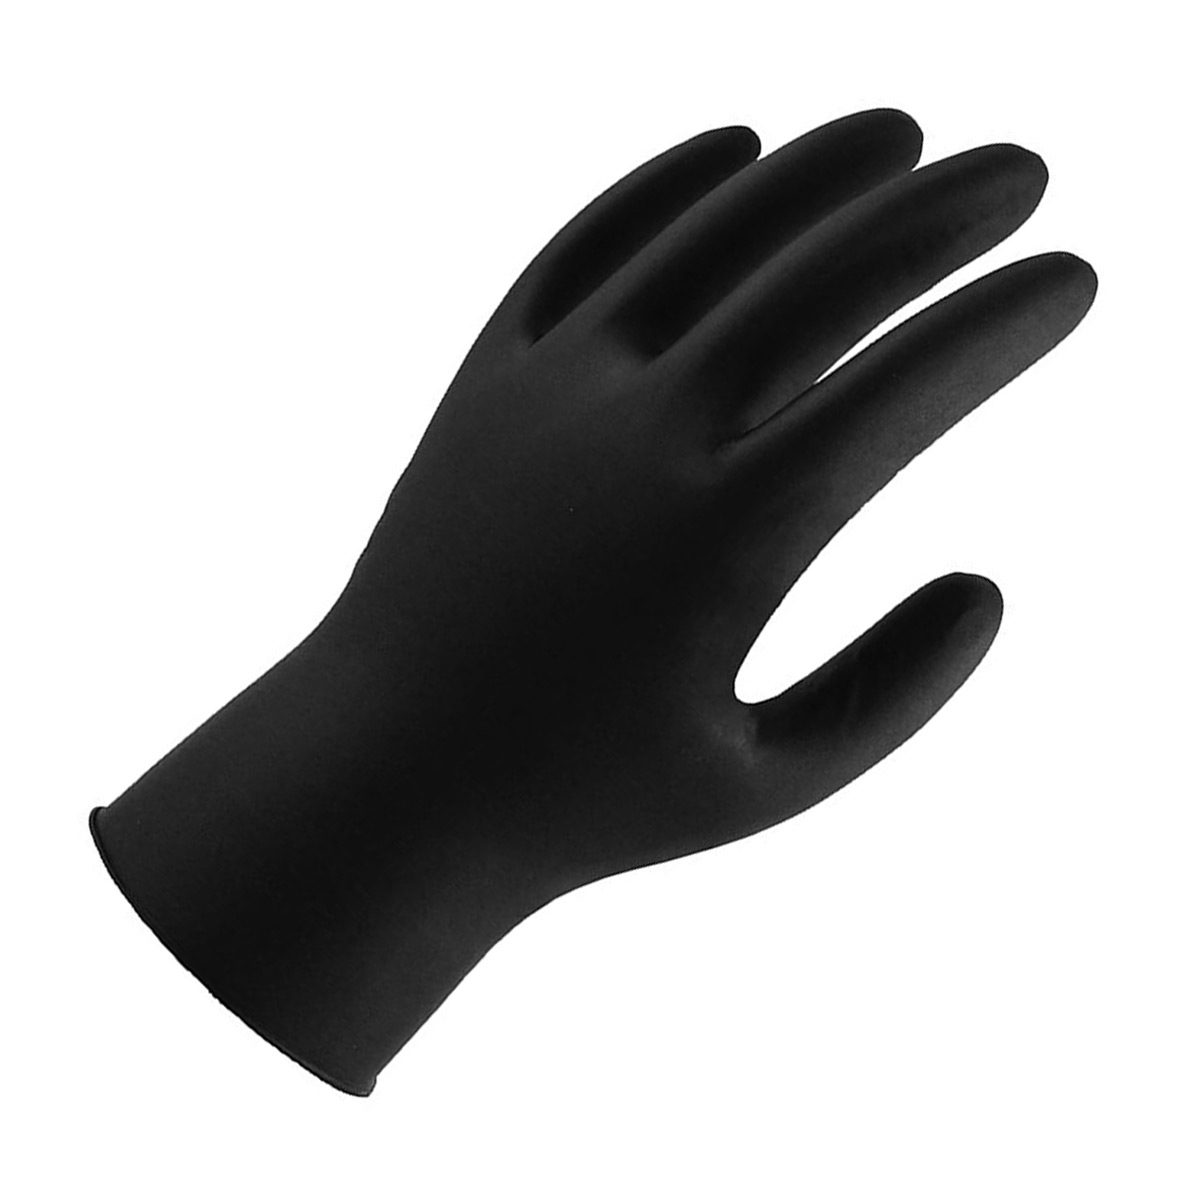 consumables-hospitality-gloves-grizzly-nitrile-black-powderfree-glove-2xl-100pk-textured-non-allergenic-chemical-resistant-non-sterile-ambidextrous-powder-free-vjs-distributors-GLOVEBNXXL